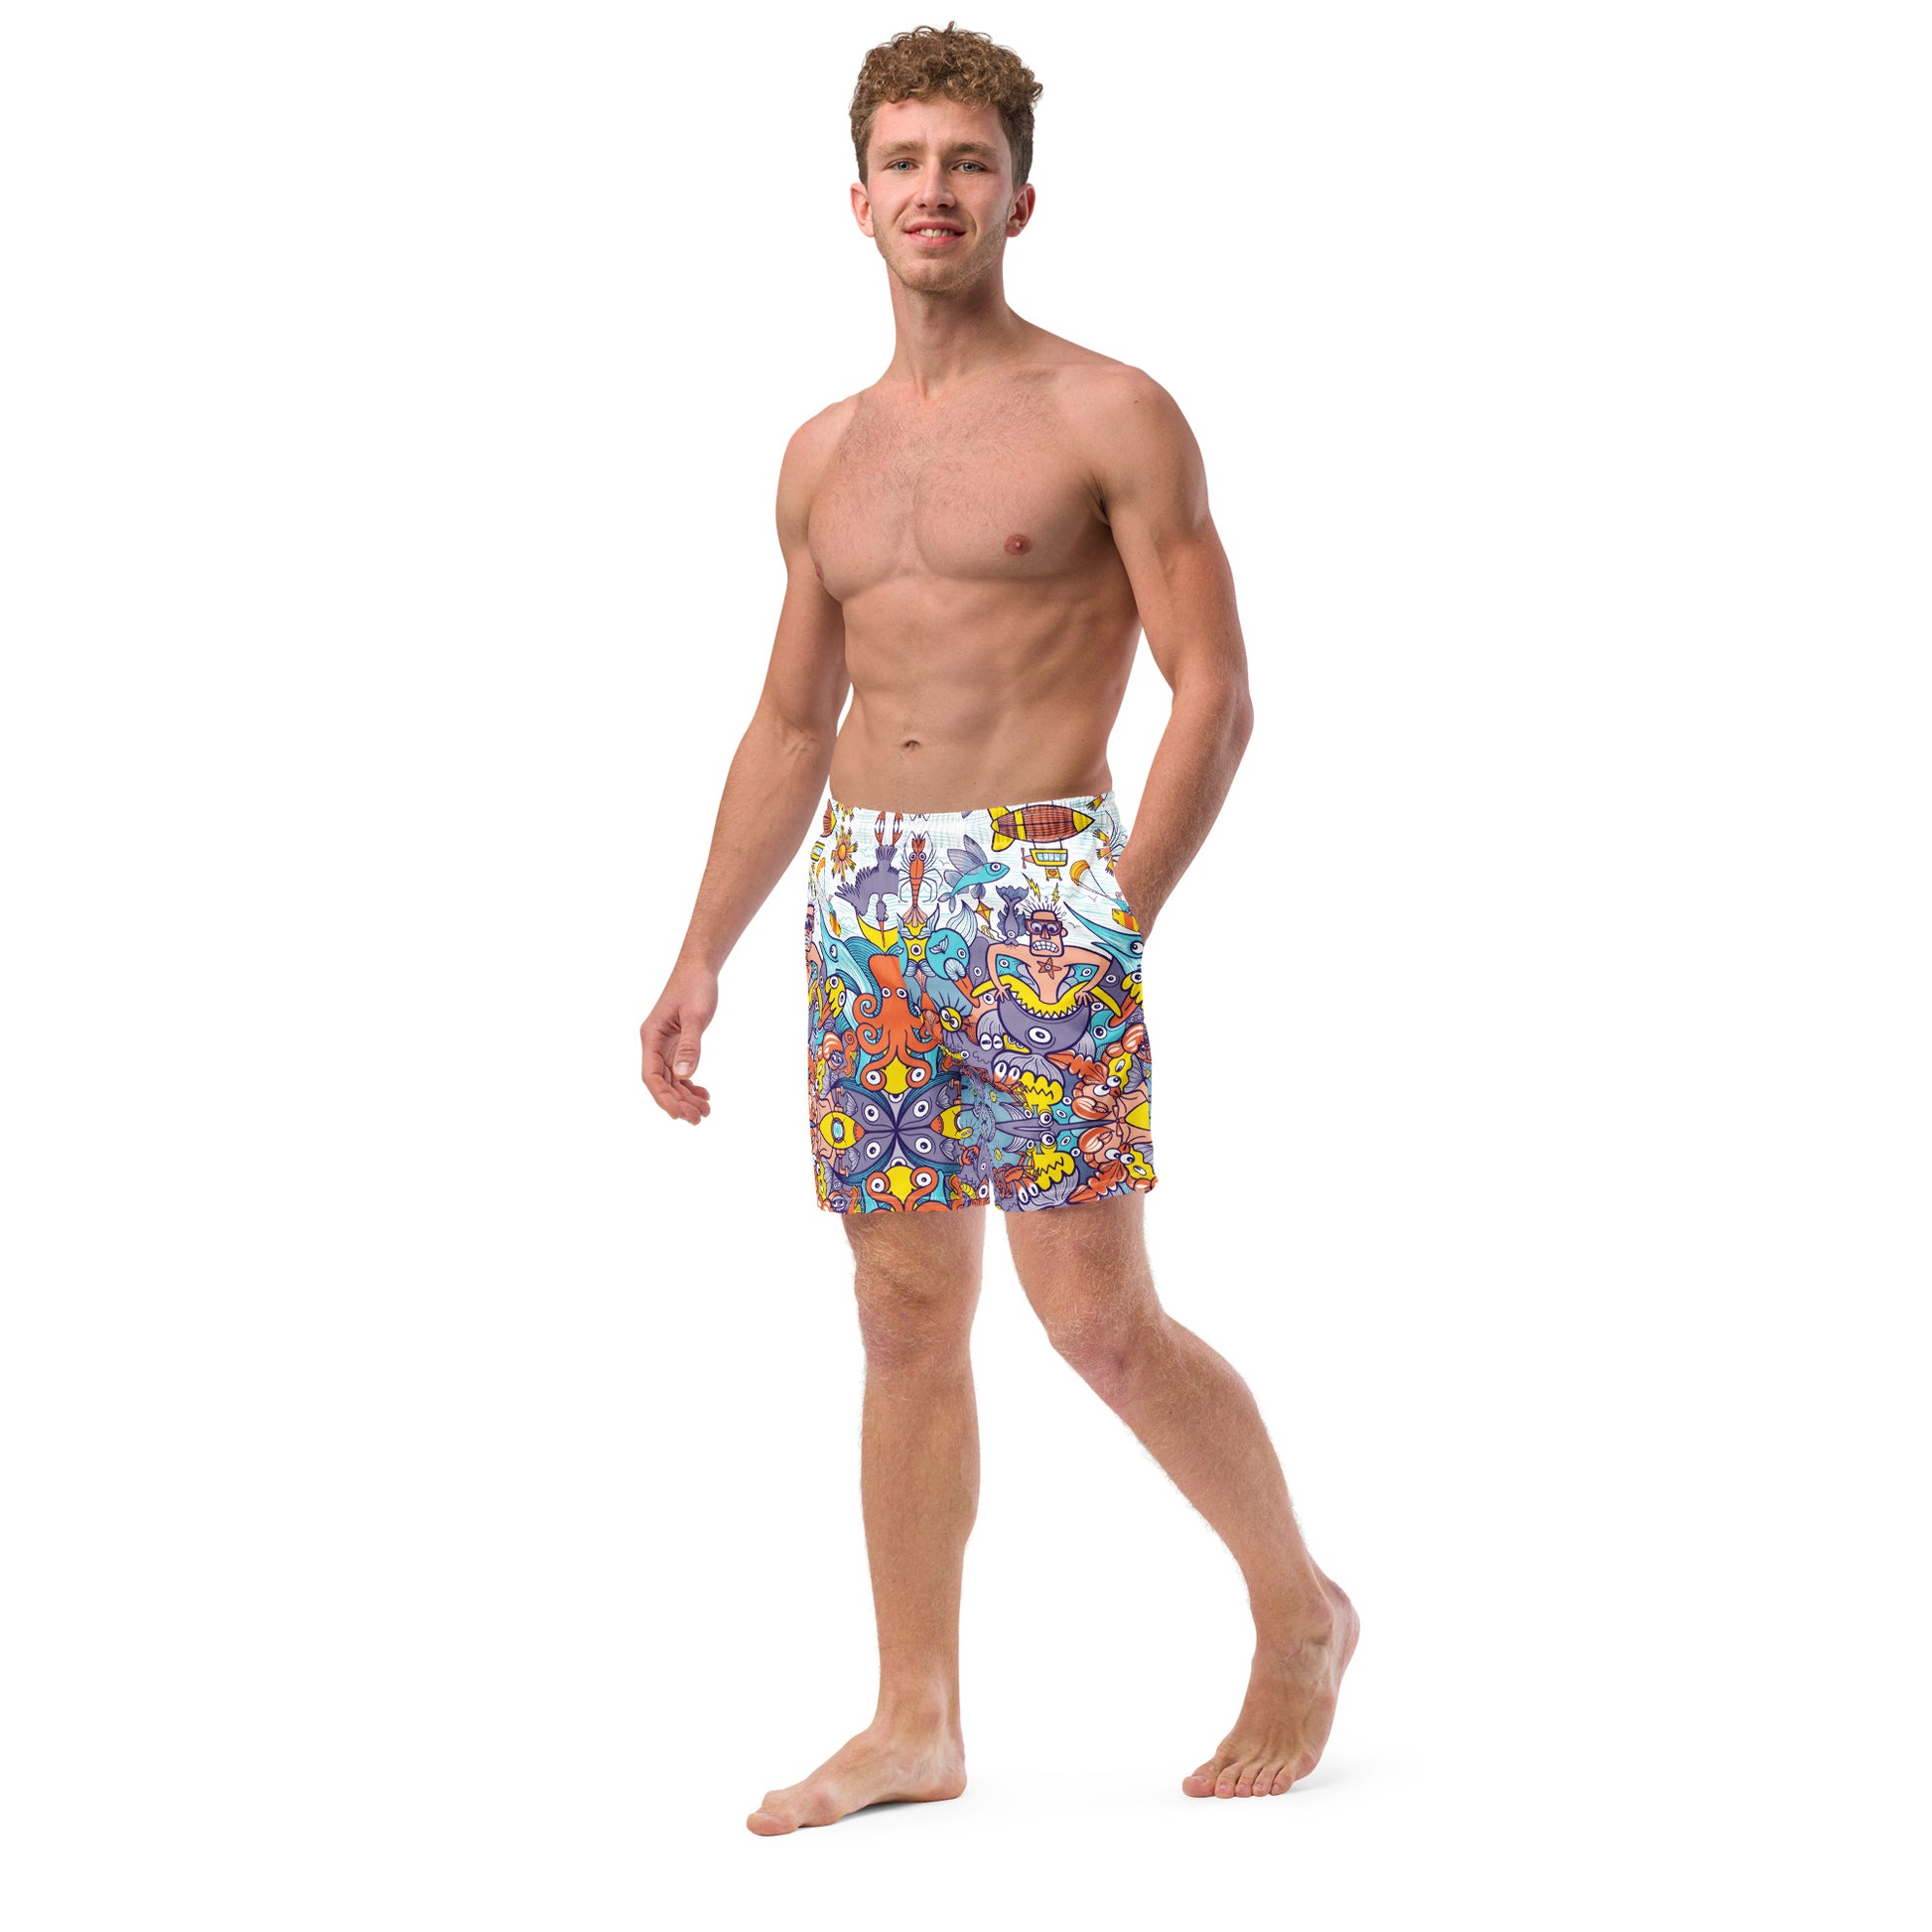 Smiling man wearing Men's swim trunks All-over printed with Ready for adventure this summer?